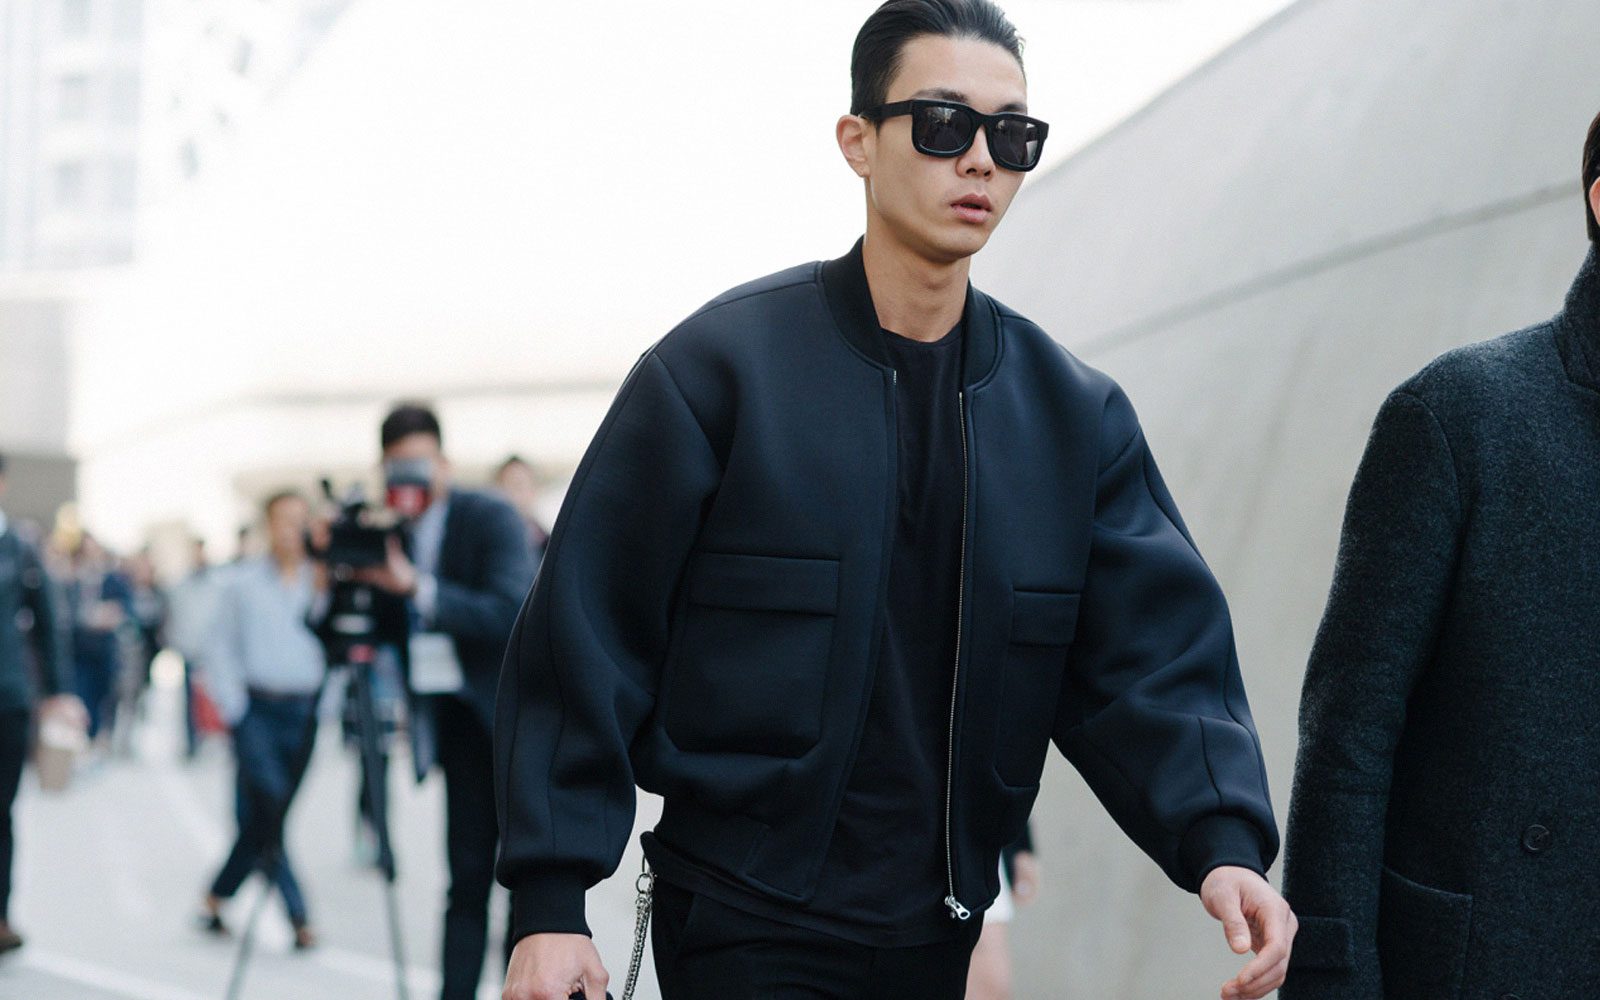 Man wearing all black with black bomber jacket and black sunglasses